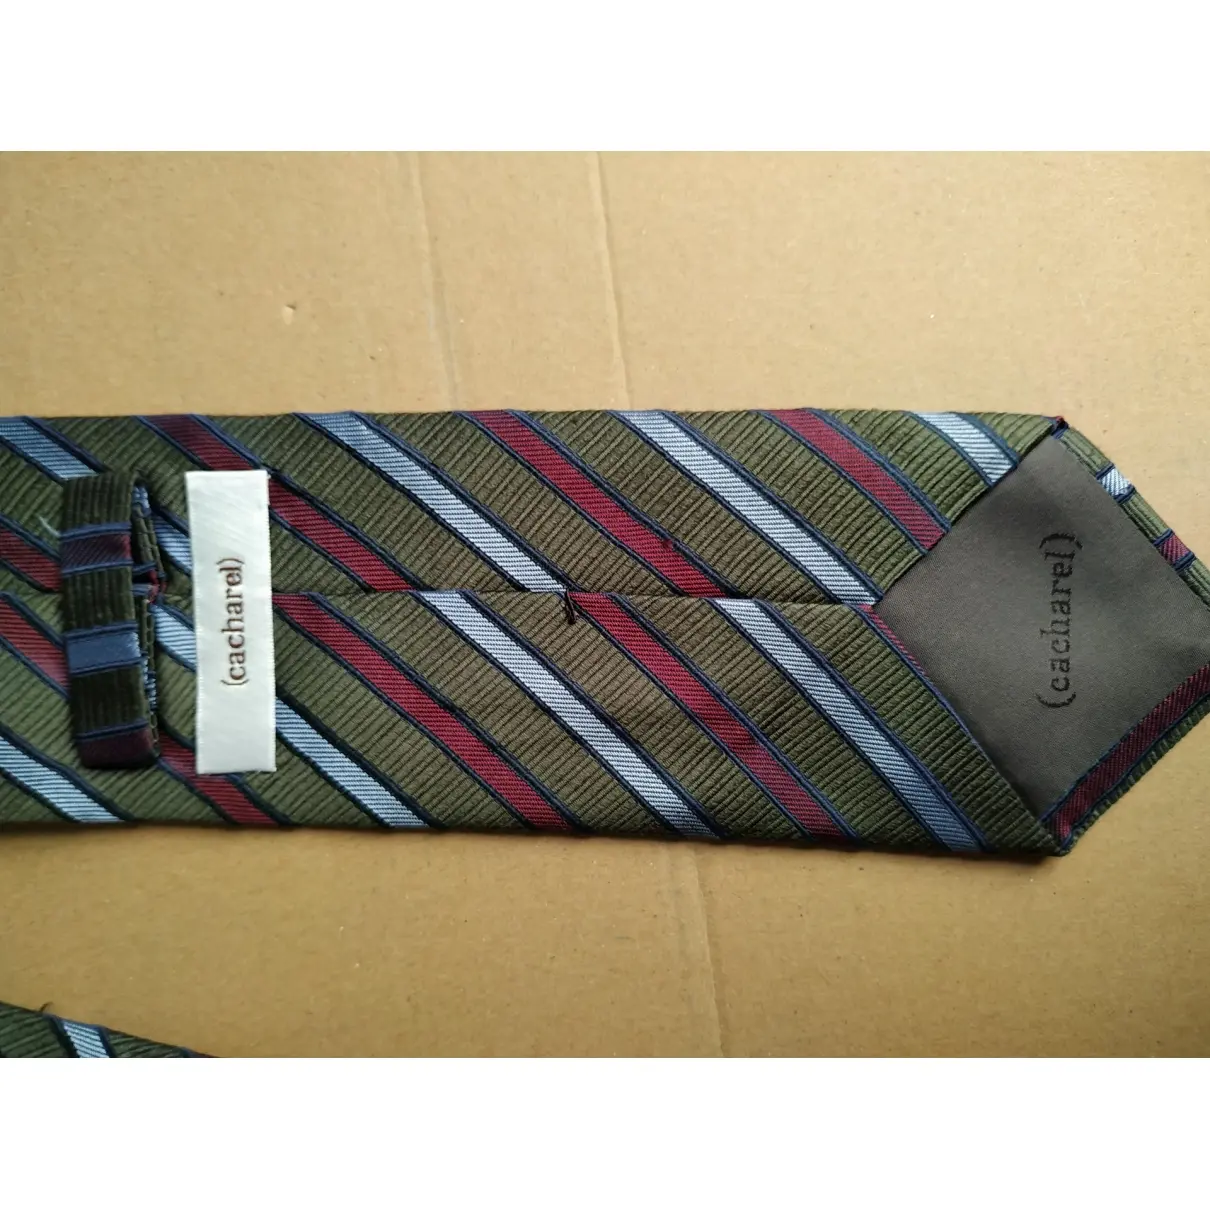 Cacharel Silk tie for sale